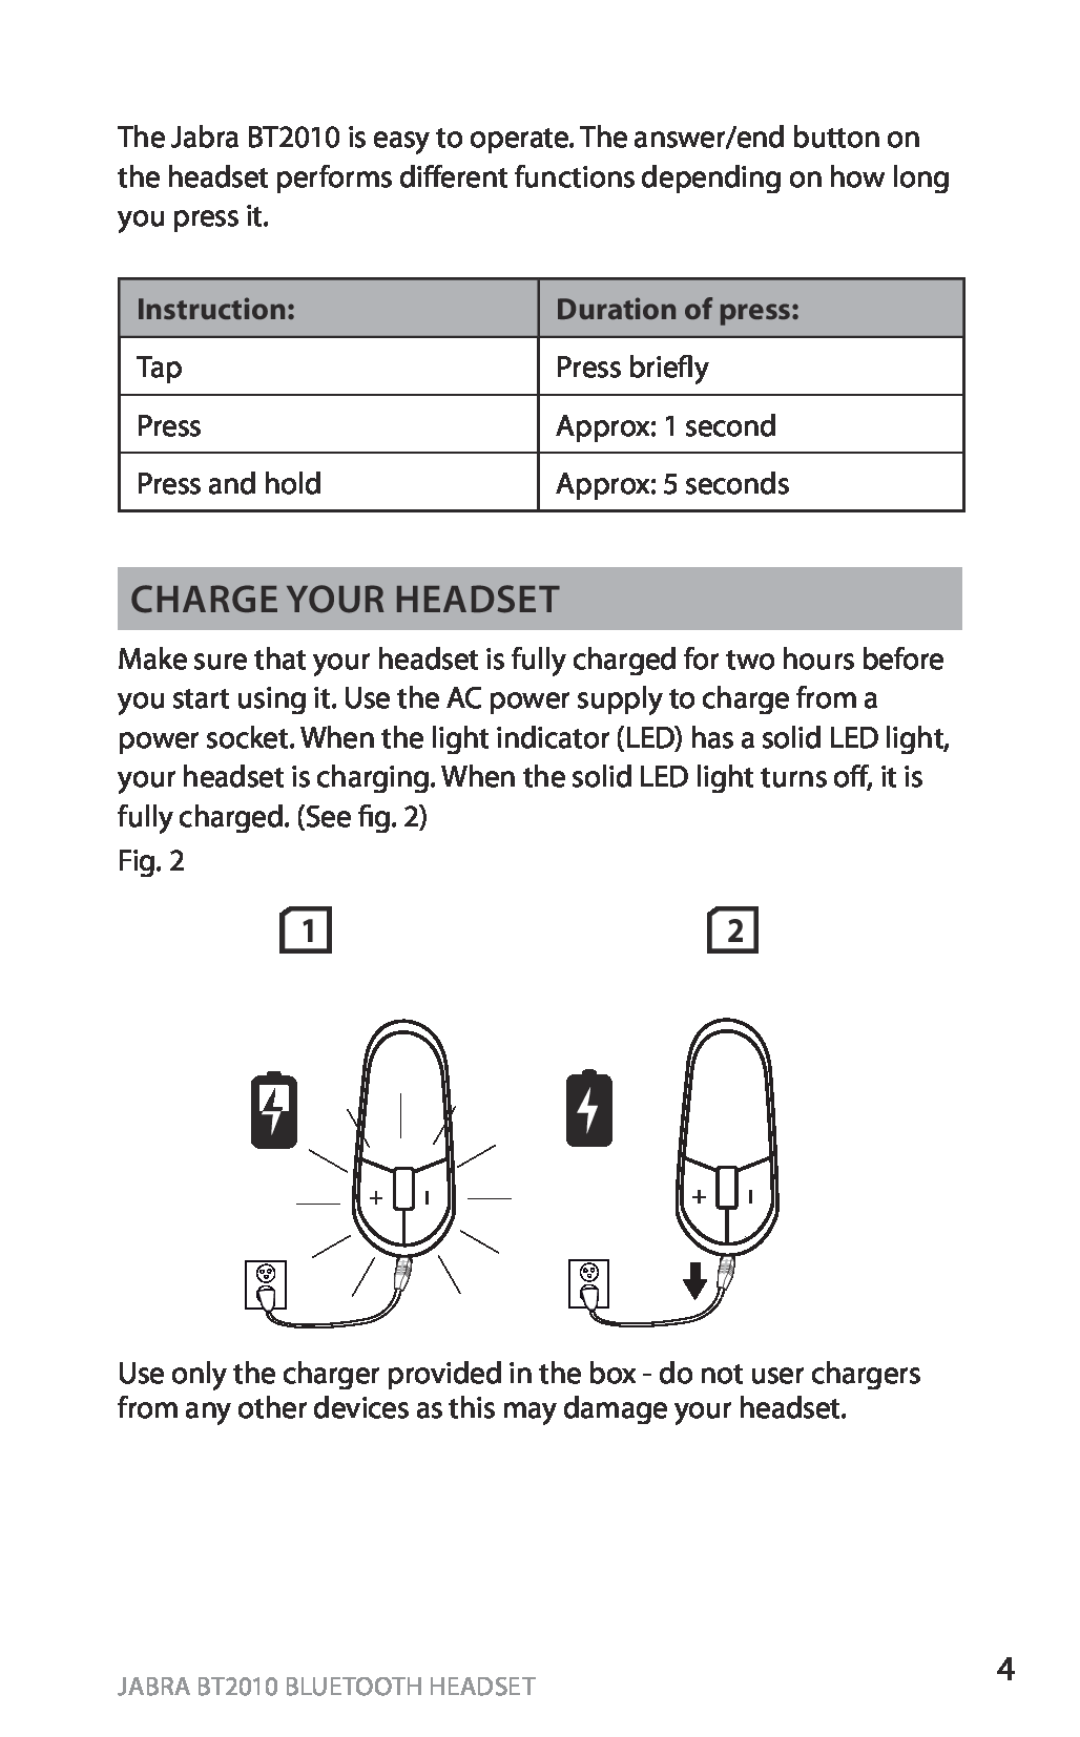 Jabra BT2010 user manual Charge your headset, Instruction, Duration of press, english 